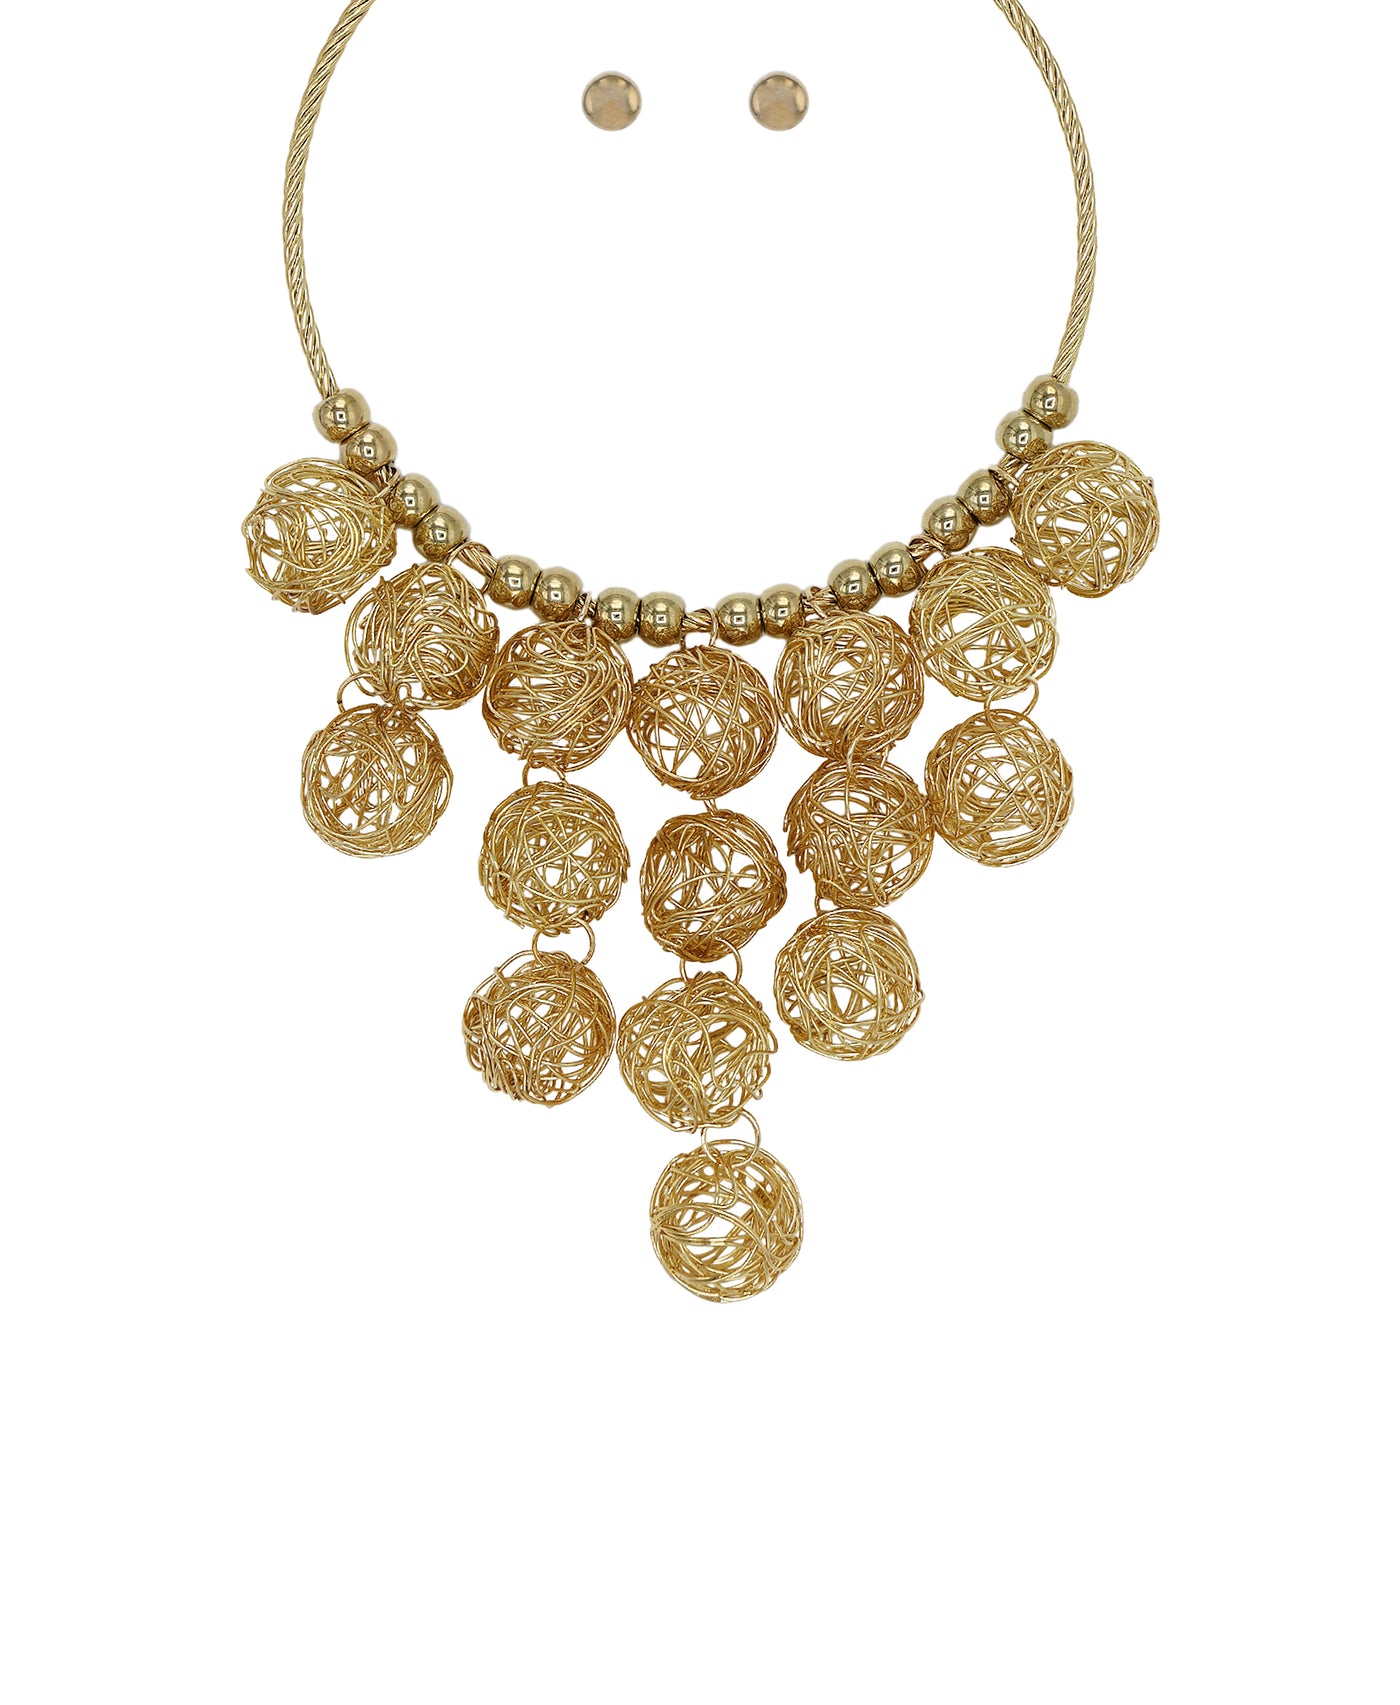 Oversized Collar Necklace w/ Coiled Spheres & Earring Set image 1